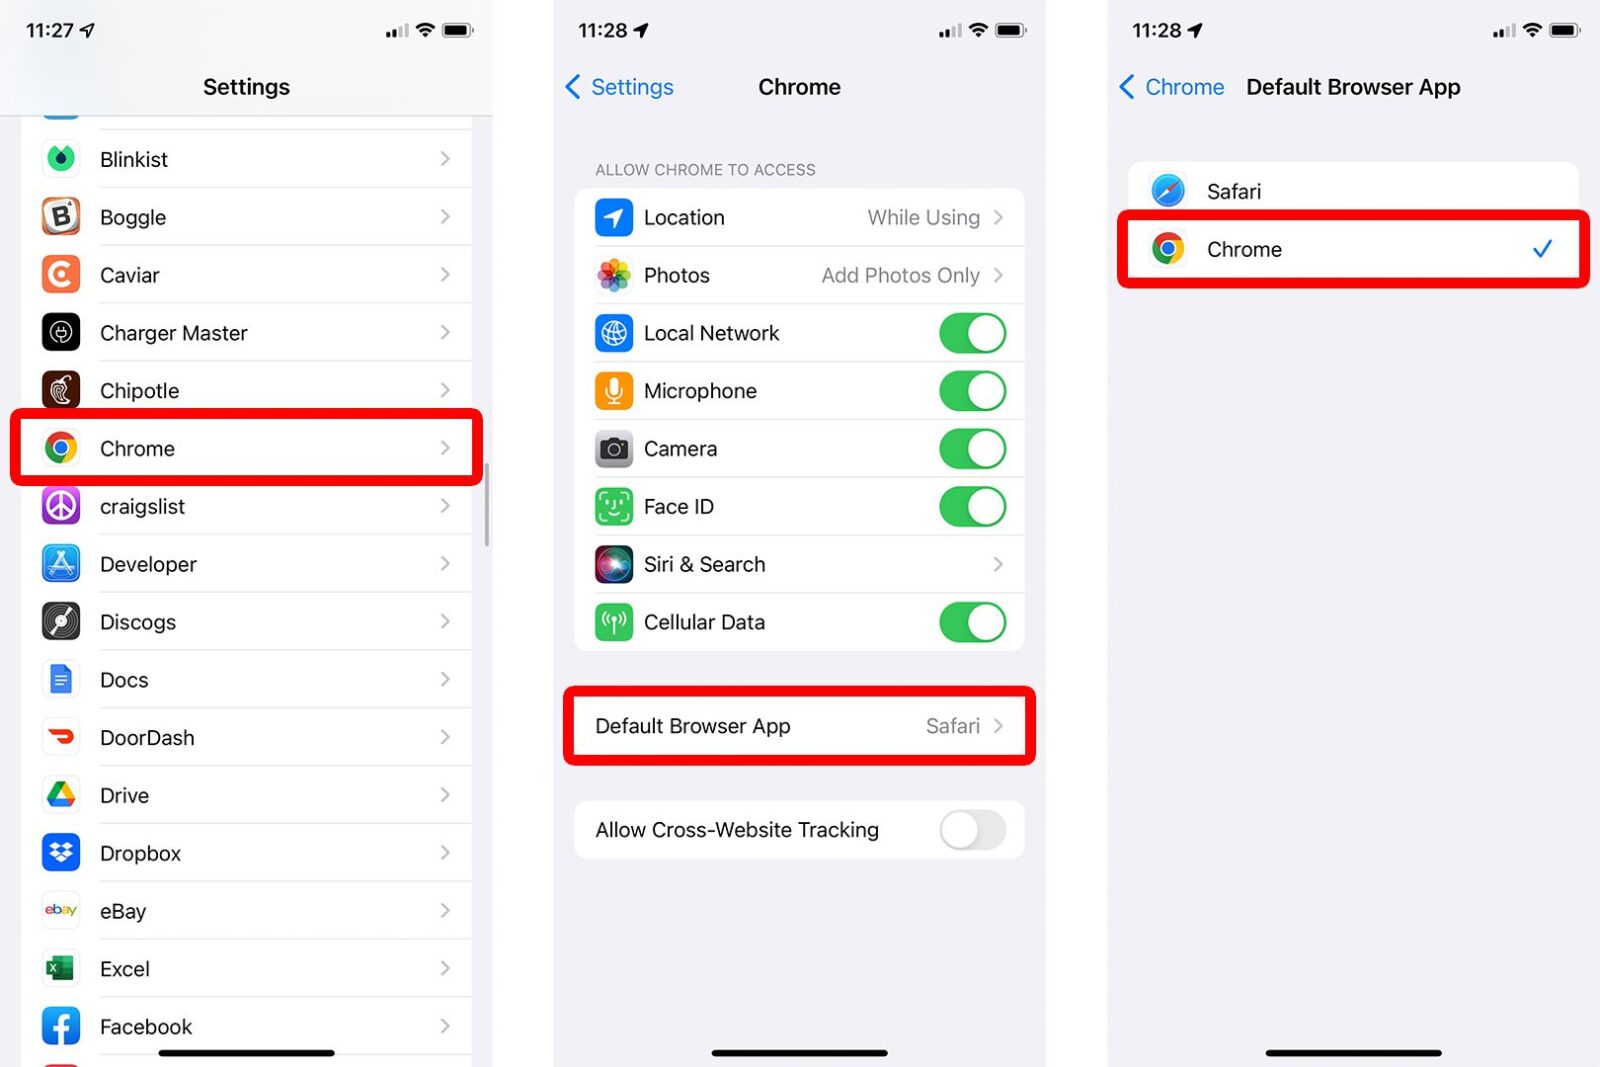 How to Change the Default Browser on an iPhone